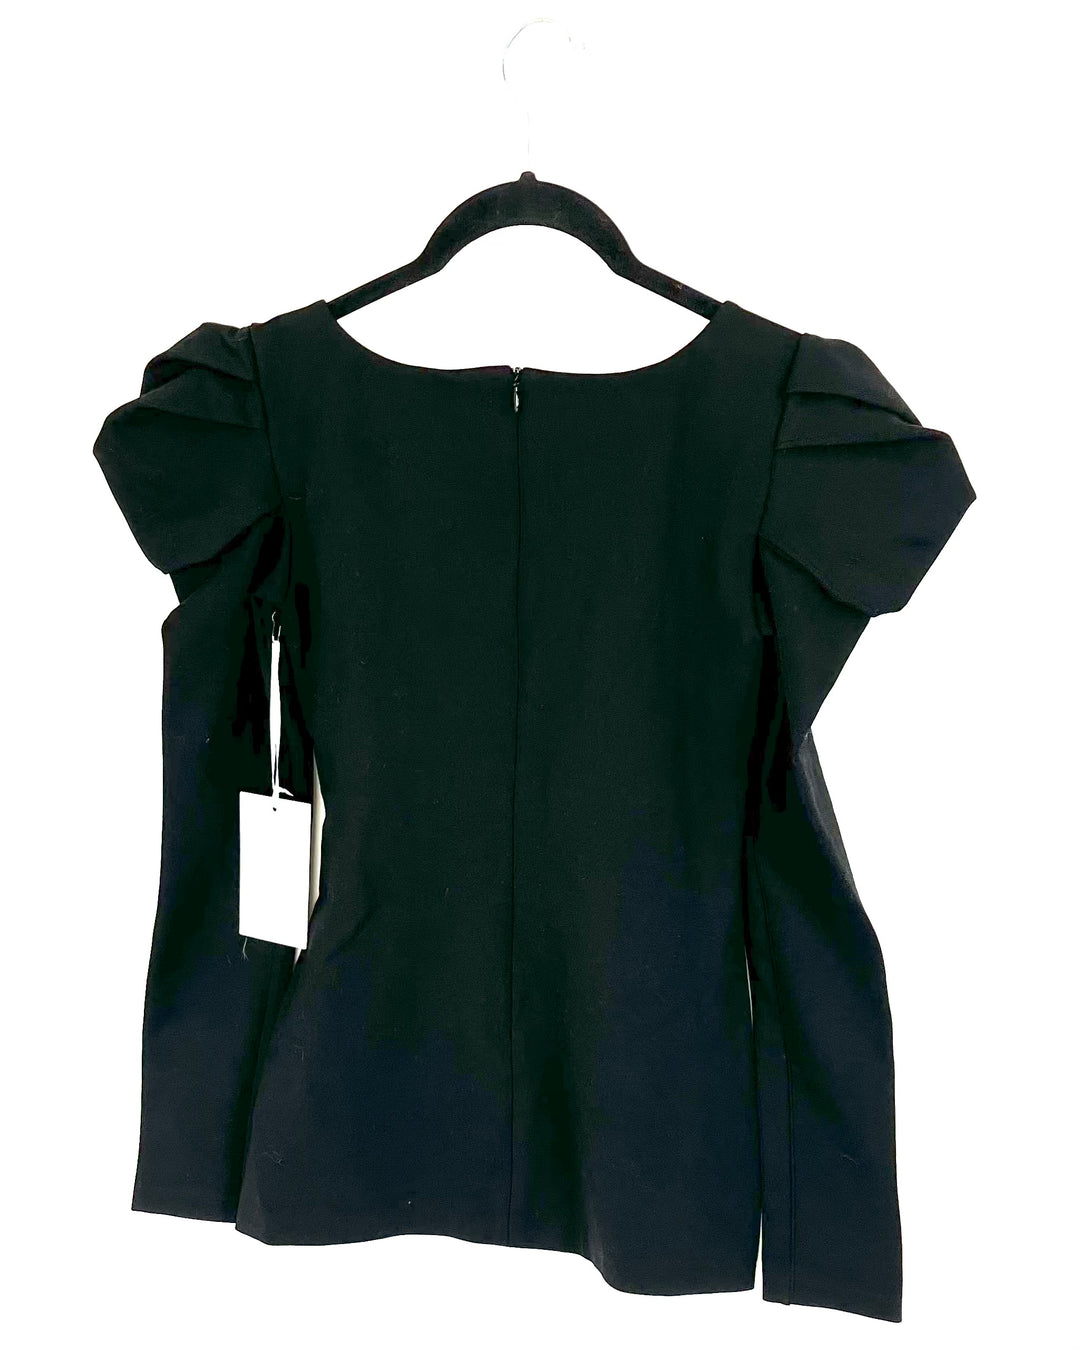 Black Long Sleeve Top - Extra Small